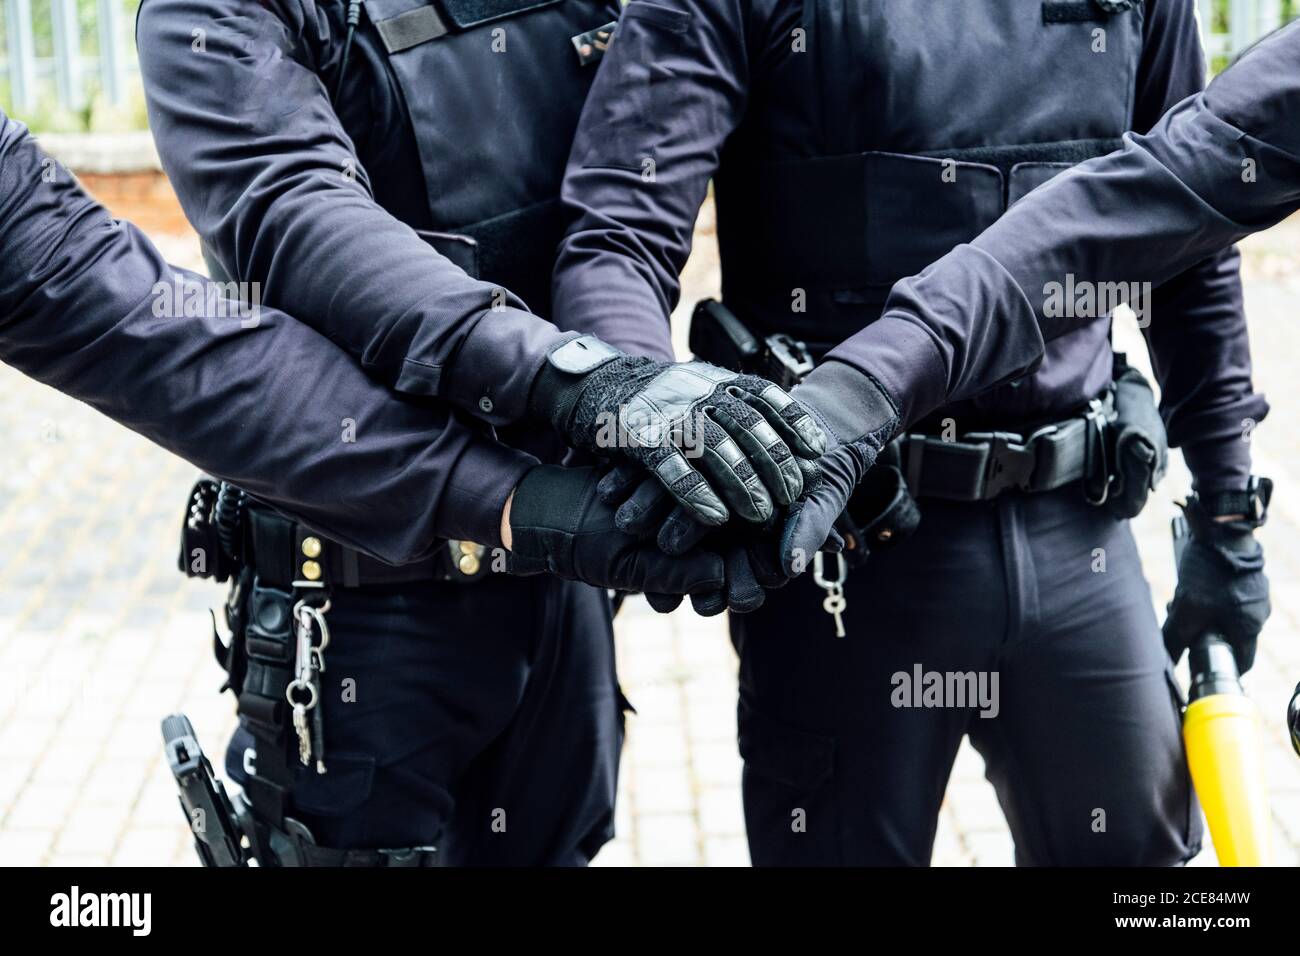 anonymous police officers in protective gears and medical masks armed with guns and batons putting hands together while preparing for operation Stock Photo